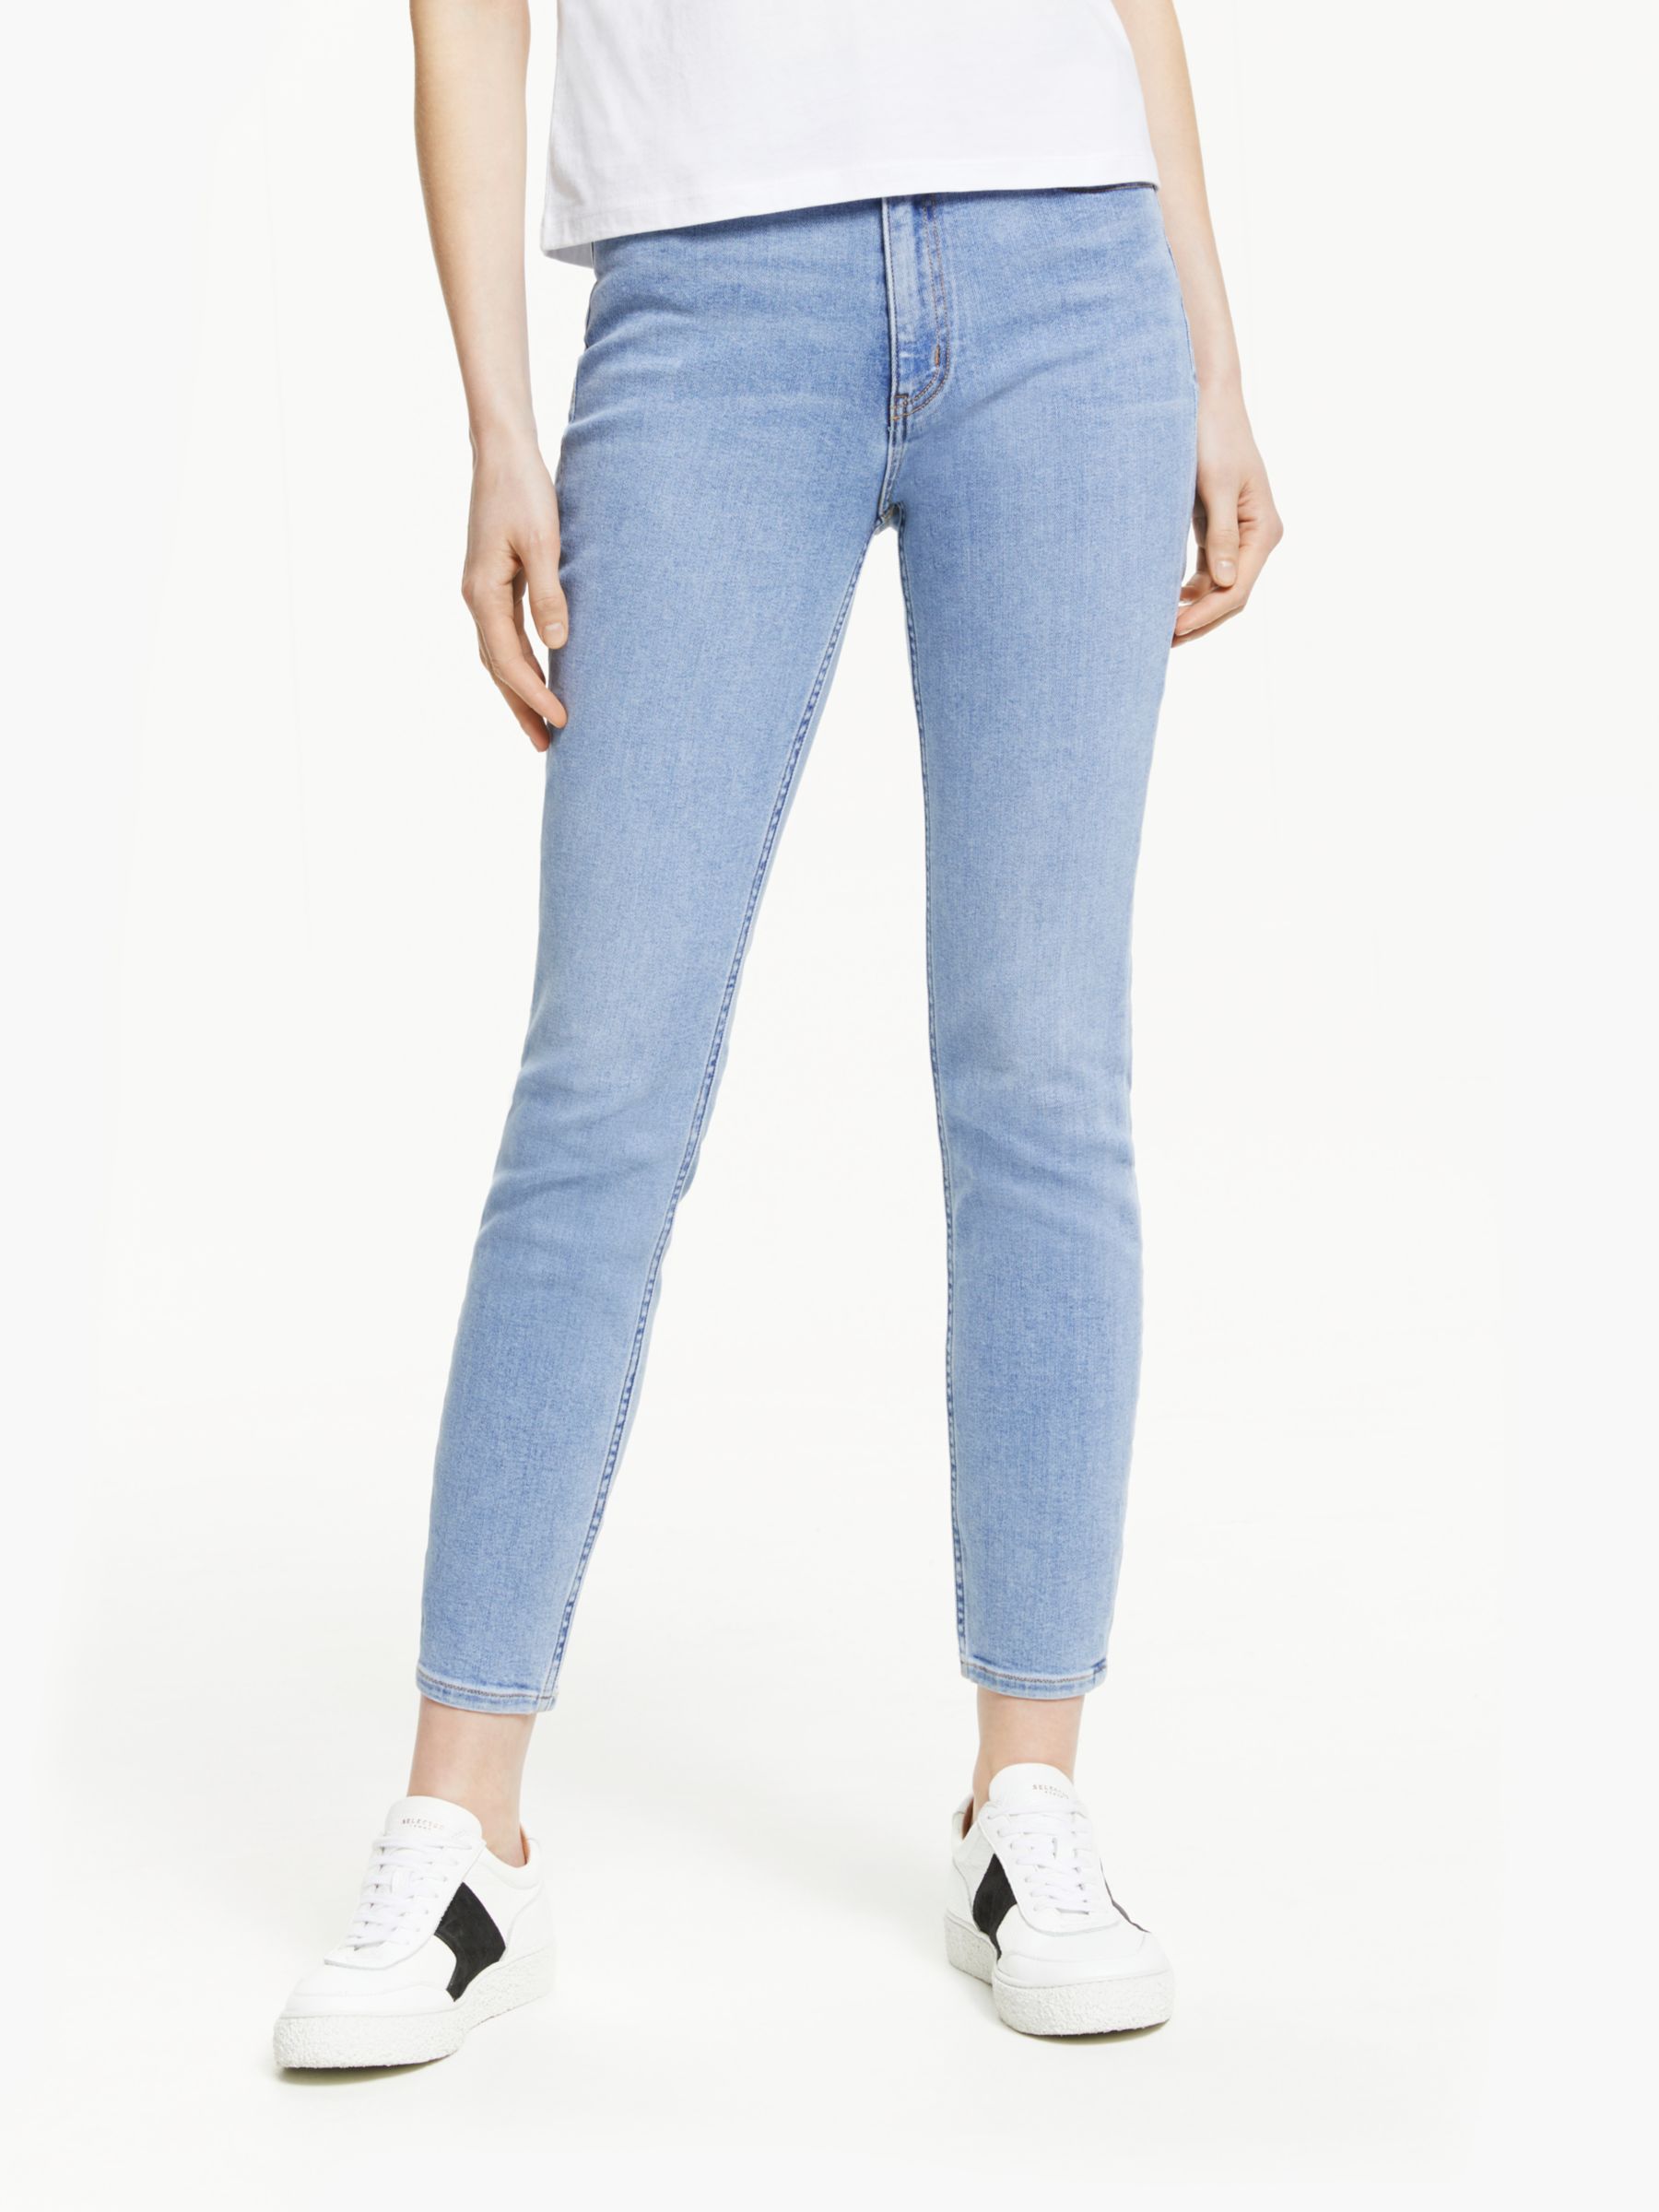 calvin klein high rise skinny ankle jeans